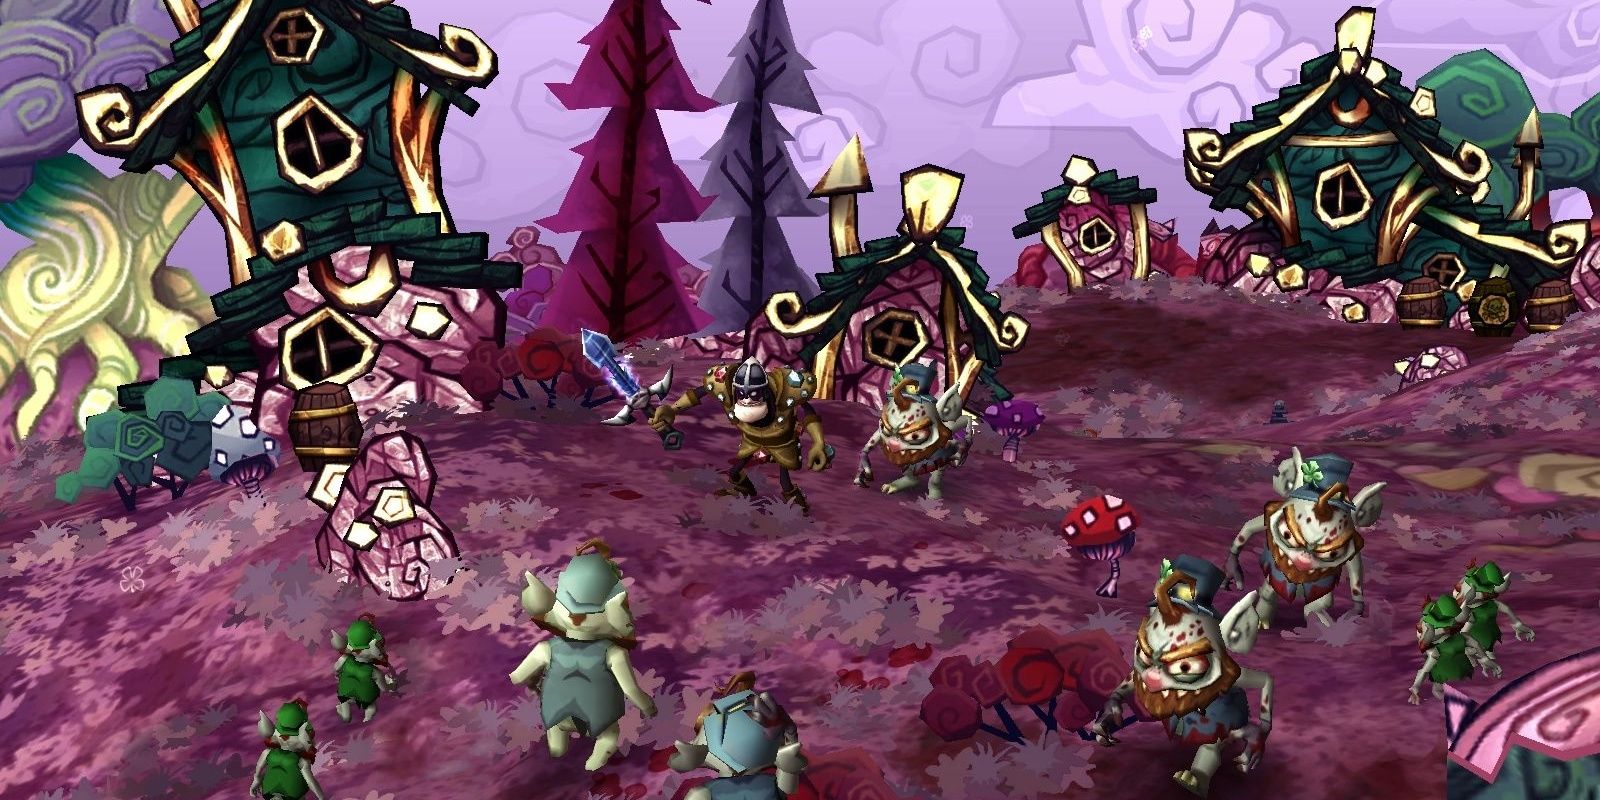 A screenshot showing DeathSpank fighting off some goblins in DeathSpank